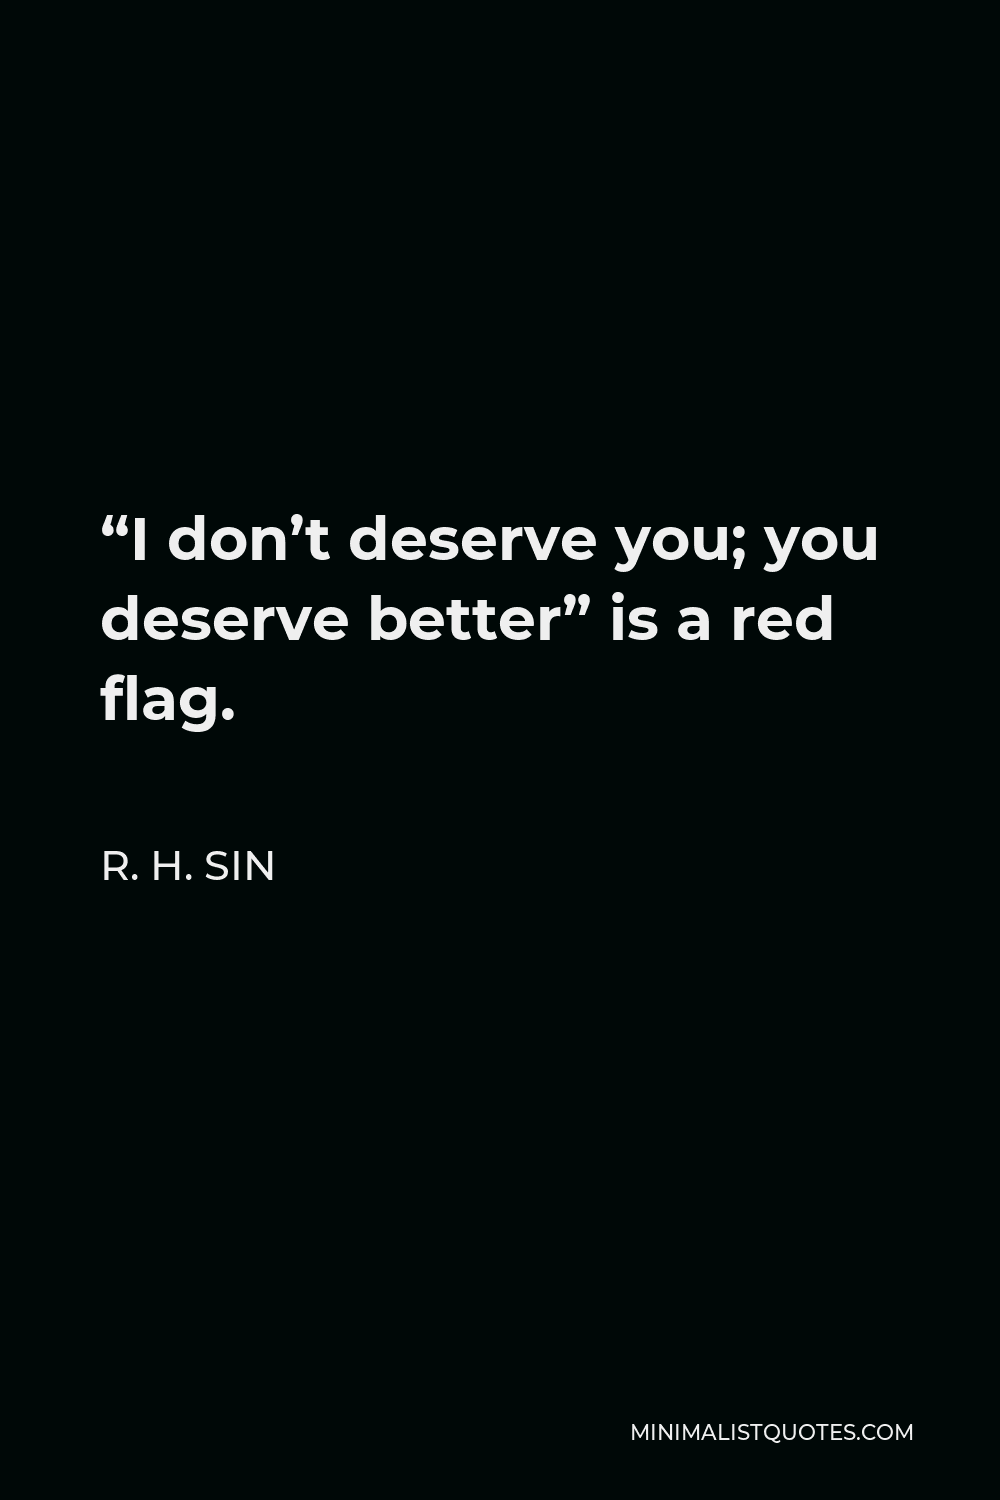 R. H. Sin Quote - “I don’t deserve you; you deserve better” is a red flag.